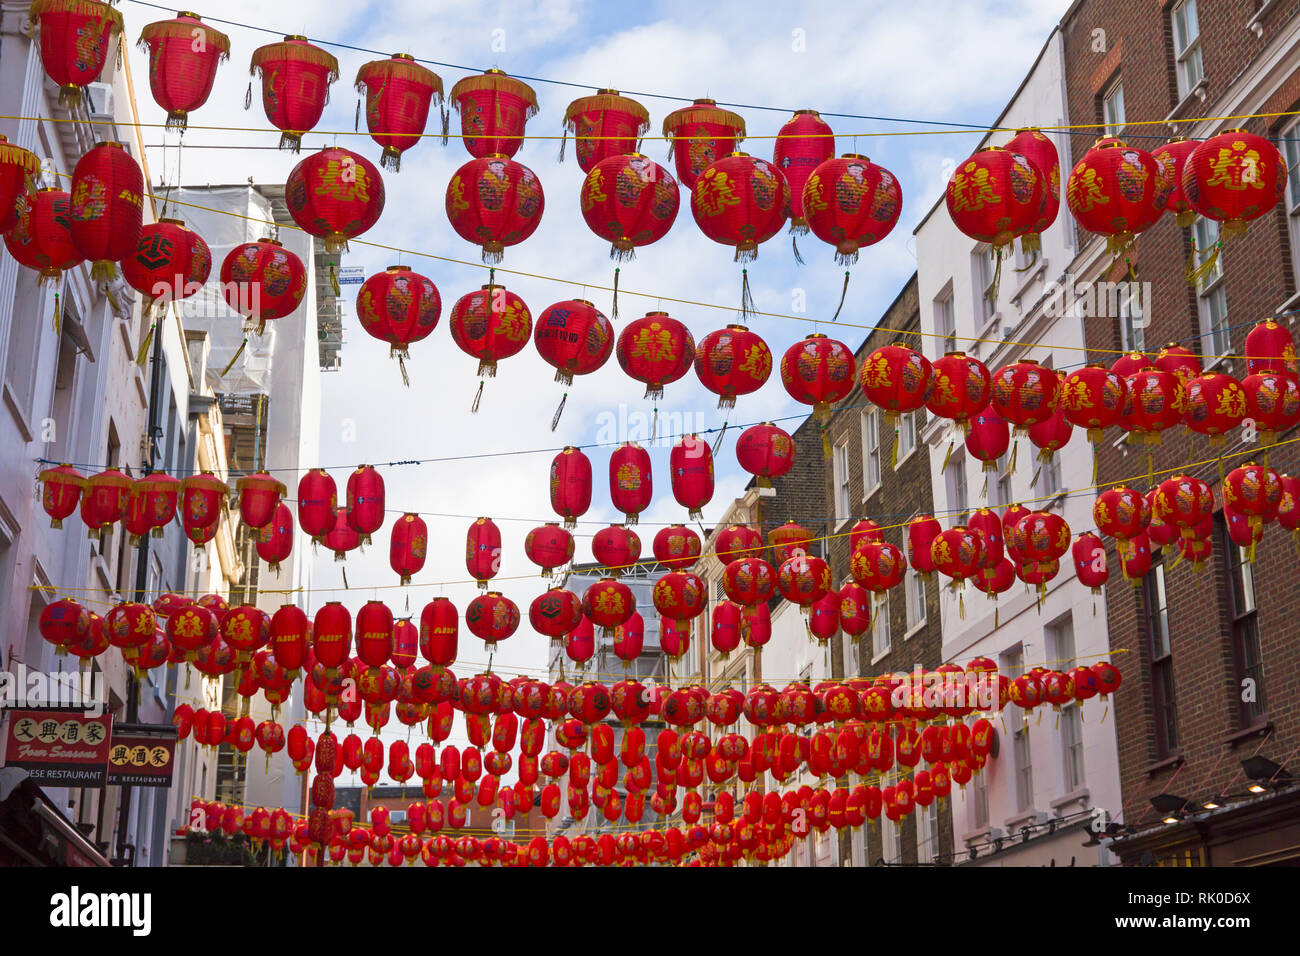 Chinese New Year celebrations celebrating year of the pig at China Town, London, UK in February Stock Photo